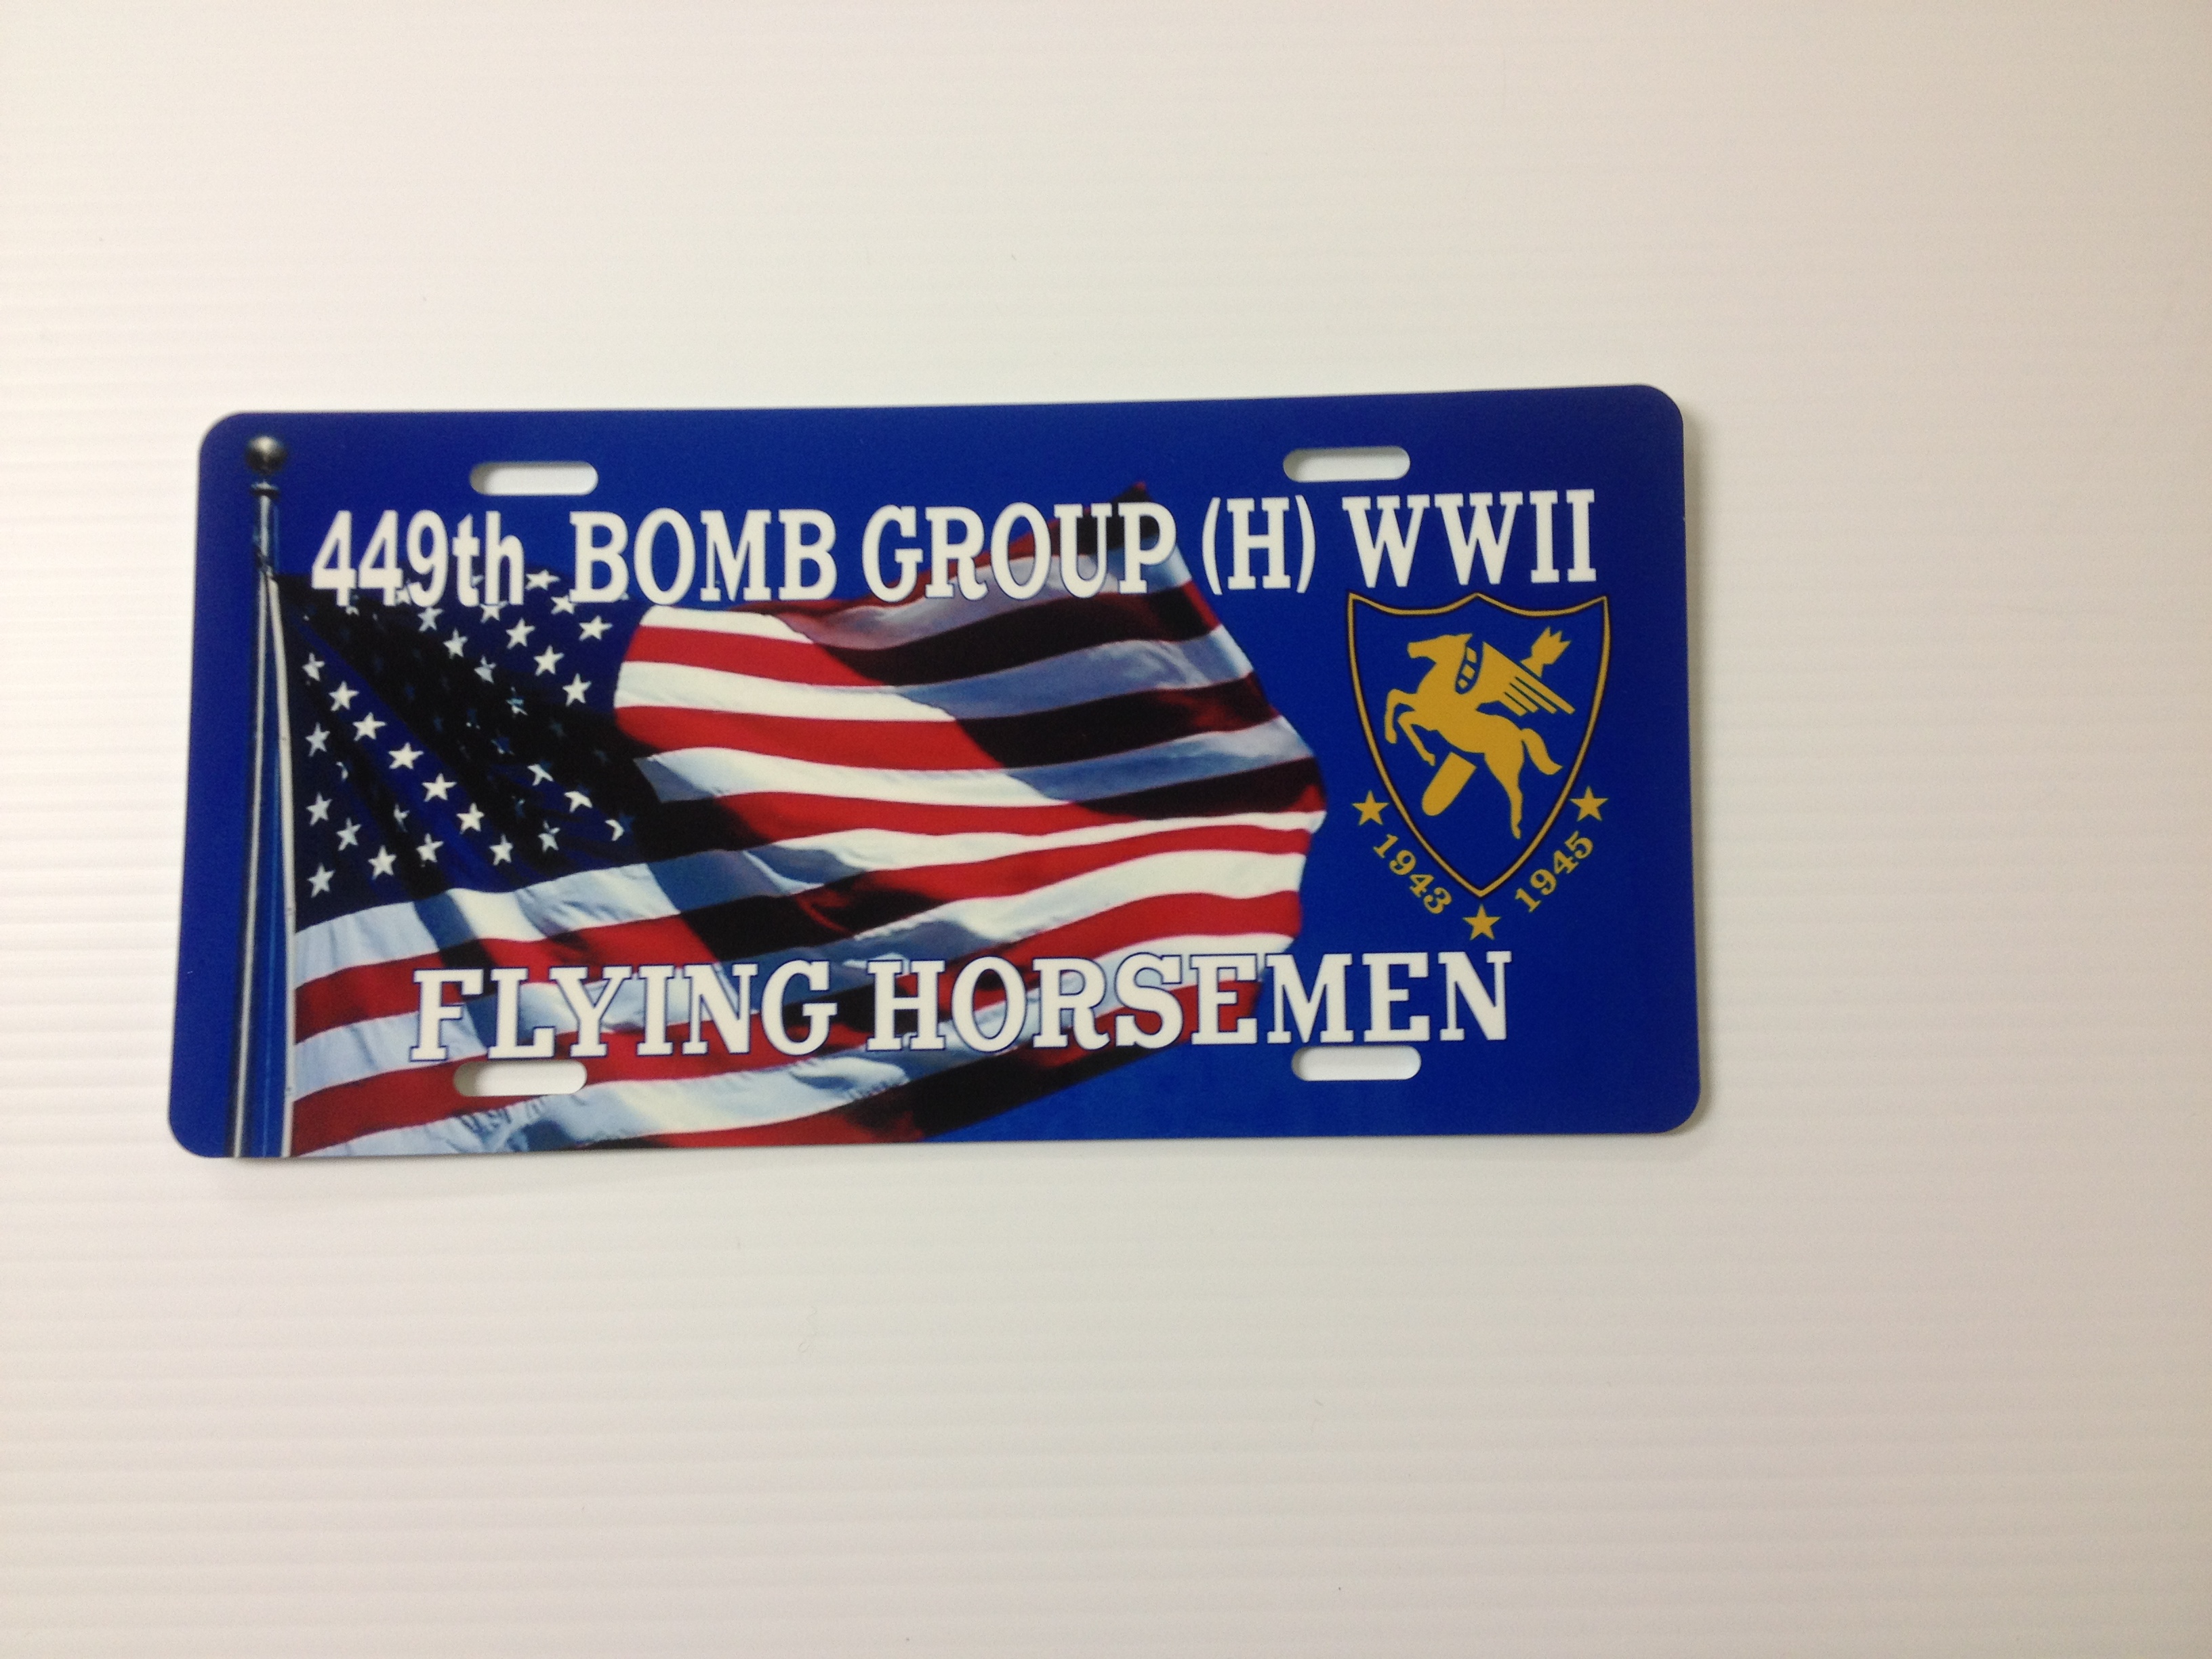 WWII Reunion made with sublimation printing